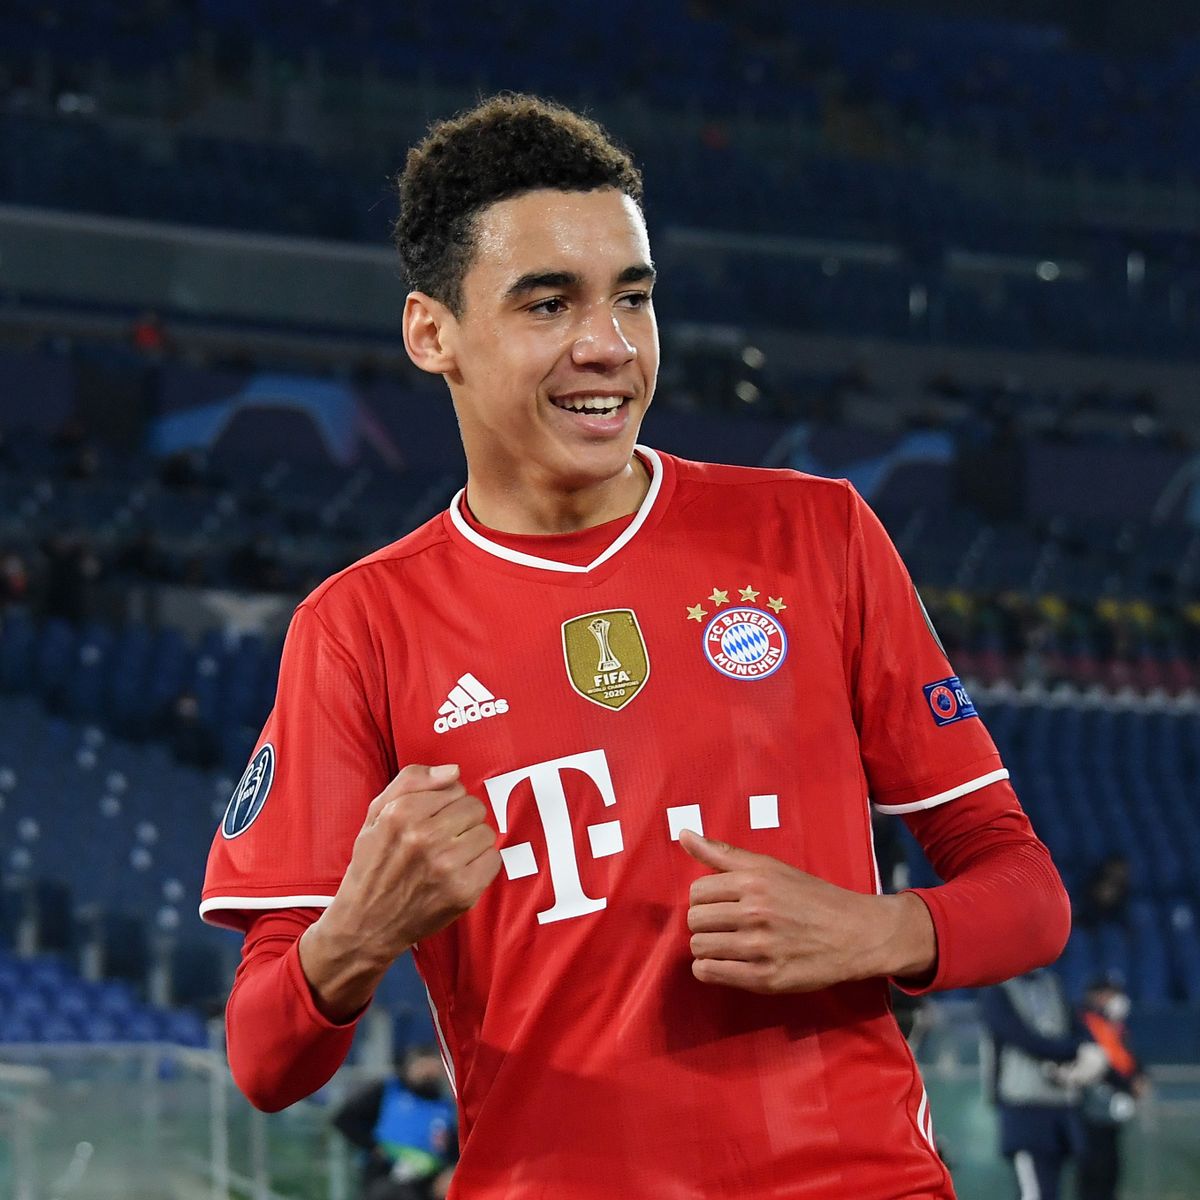 Bayern Munich starlet Jamal Musiala confirms he will pick Germany over England